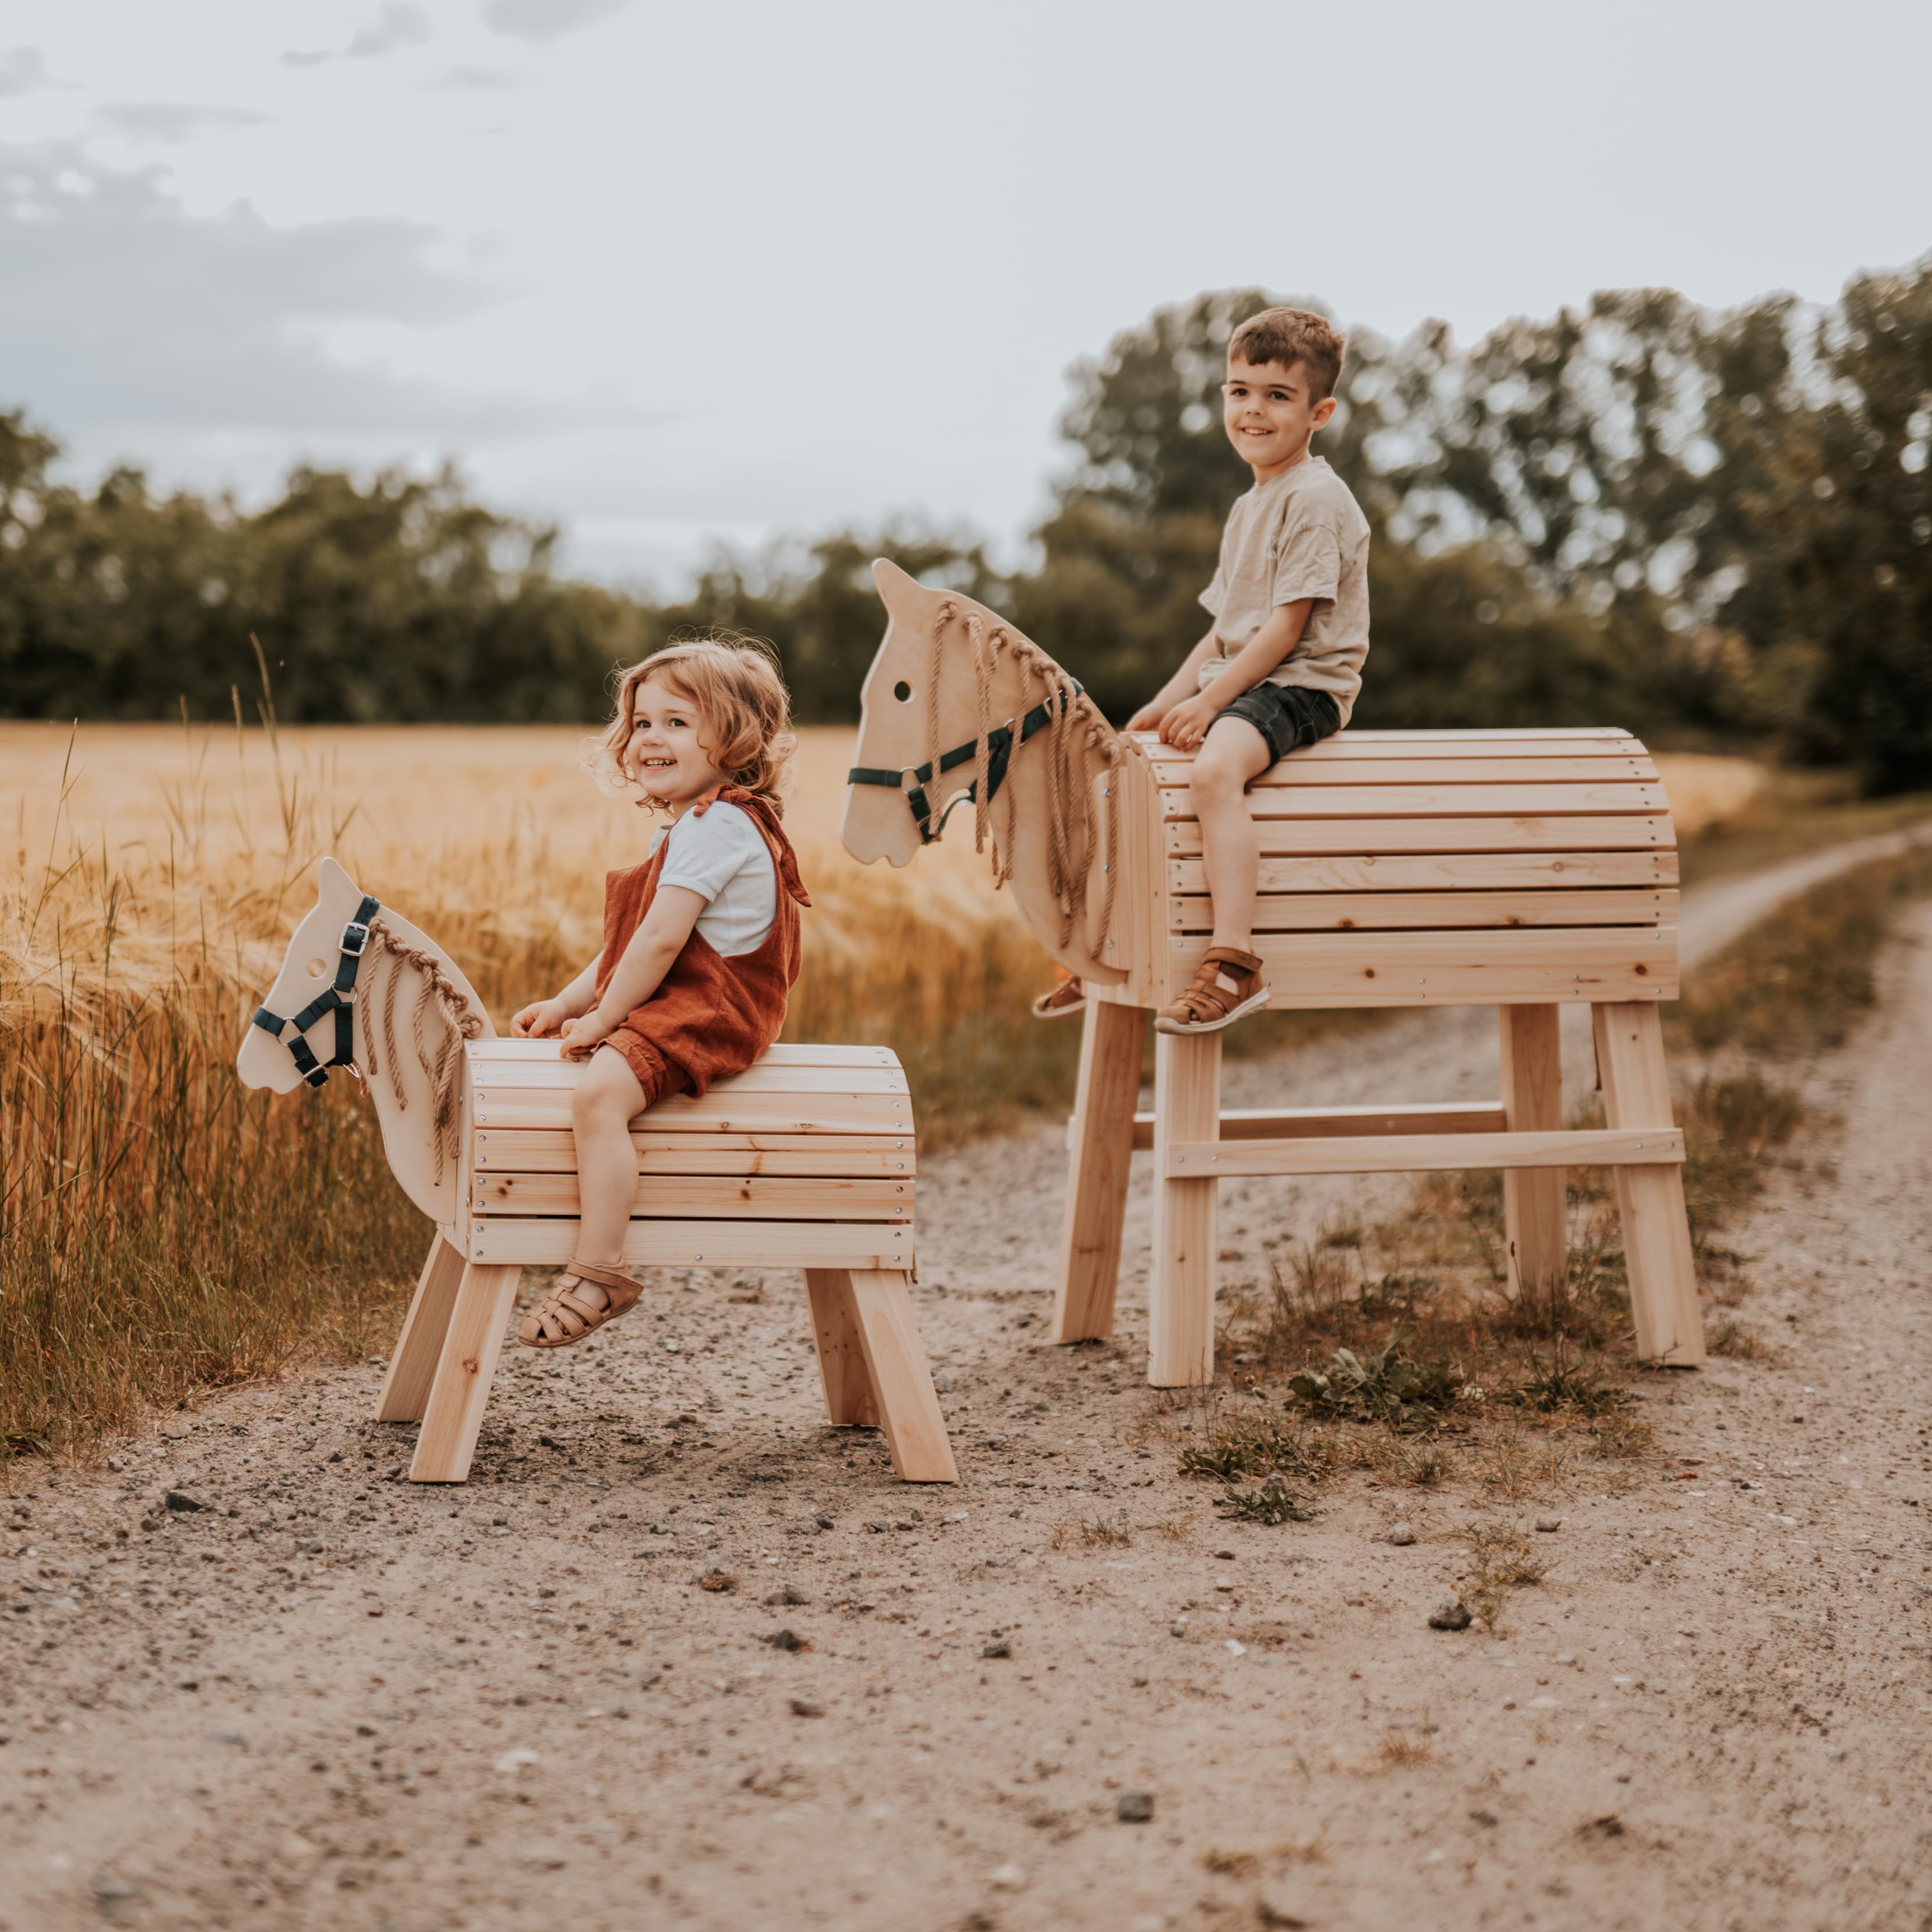 Small foot: a wooden compact horse for children outdoor